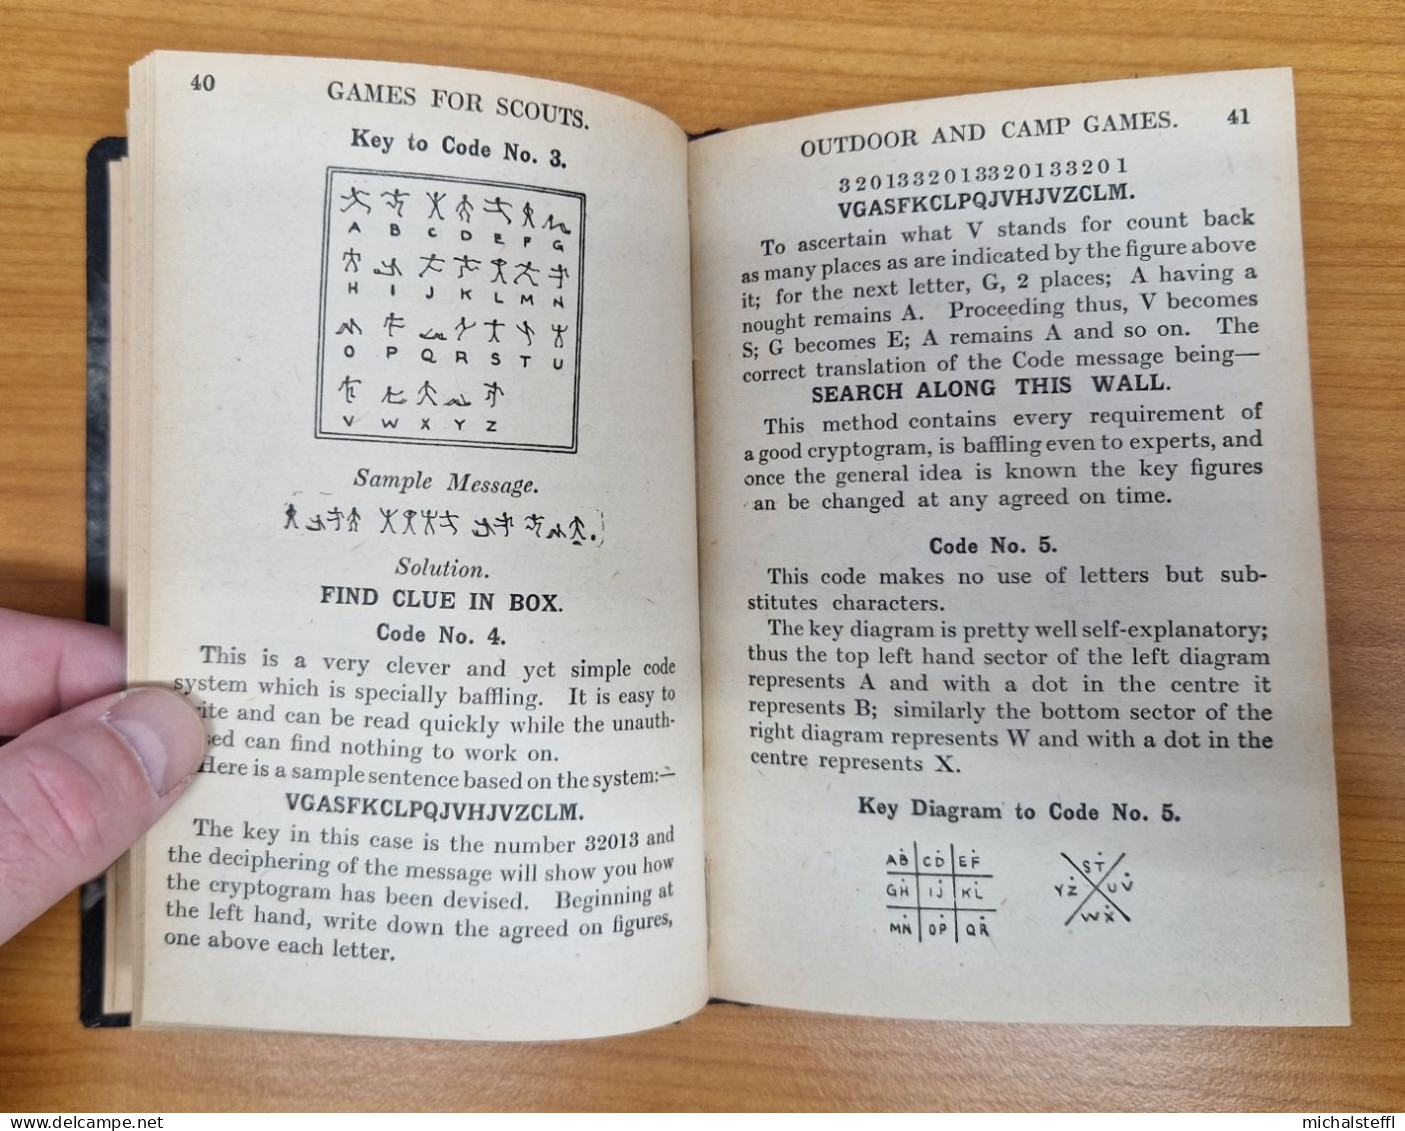 Games For Scouts, Mackenzie, A W N, 1943 - Scouting